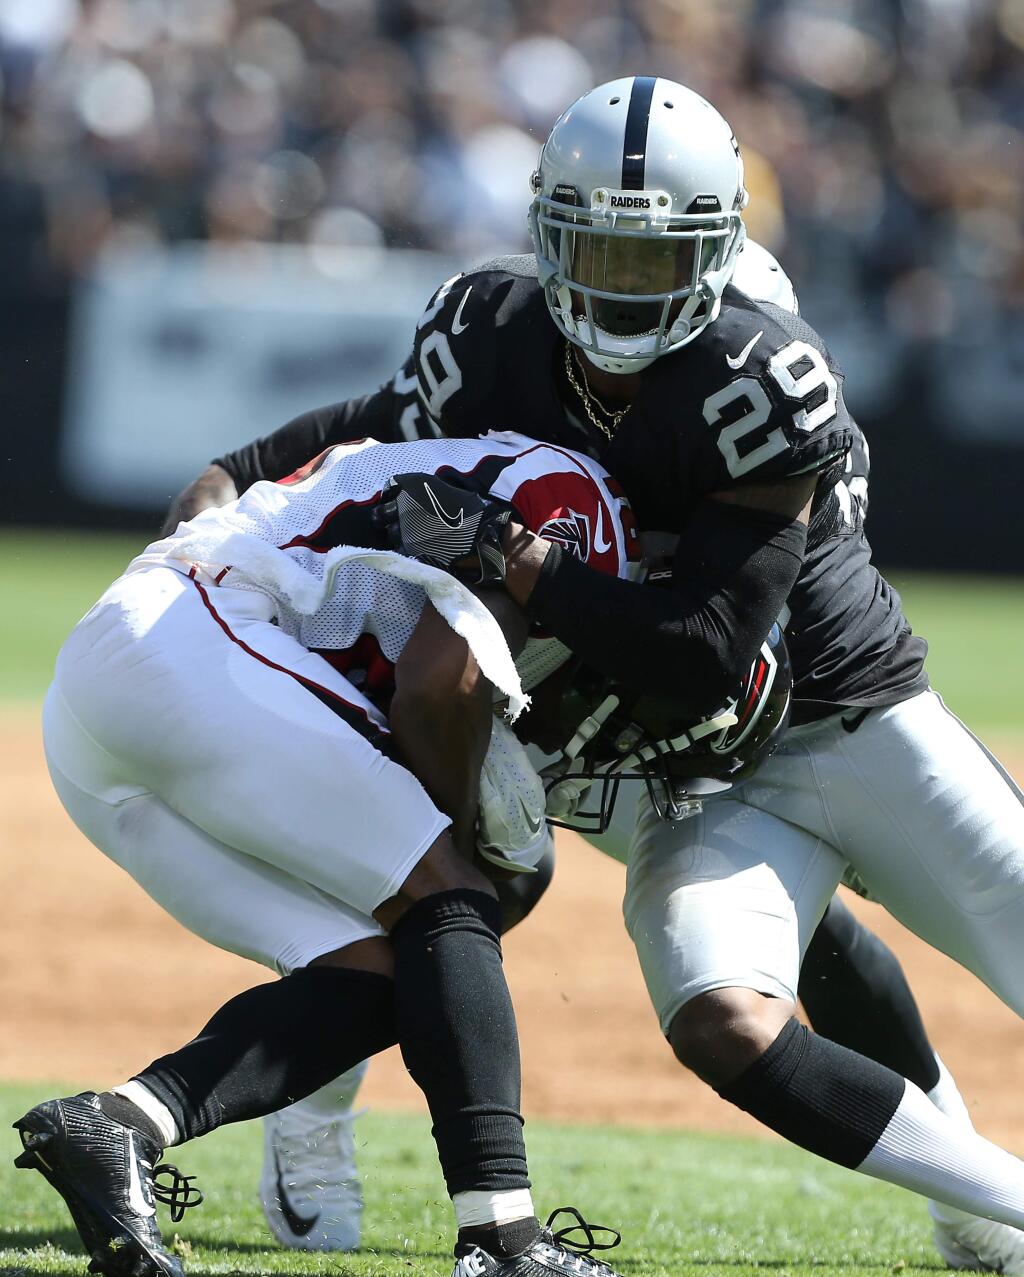 Oakland Raiders cornerback David Amerson tackles Atlanta Falcons wide receiver Taylor Gabriel during their game in Oakland on Sunday, September 18, 2016. The Raiders lost to the Falcons 35-28.(Christopher Chung/ The Press Democrat)